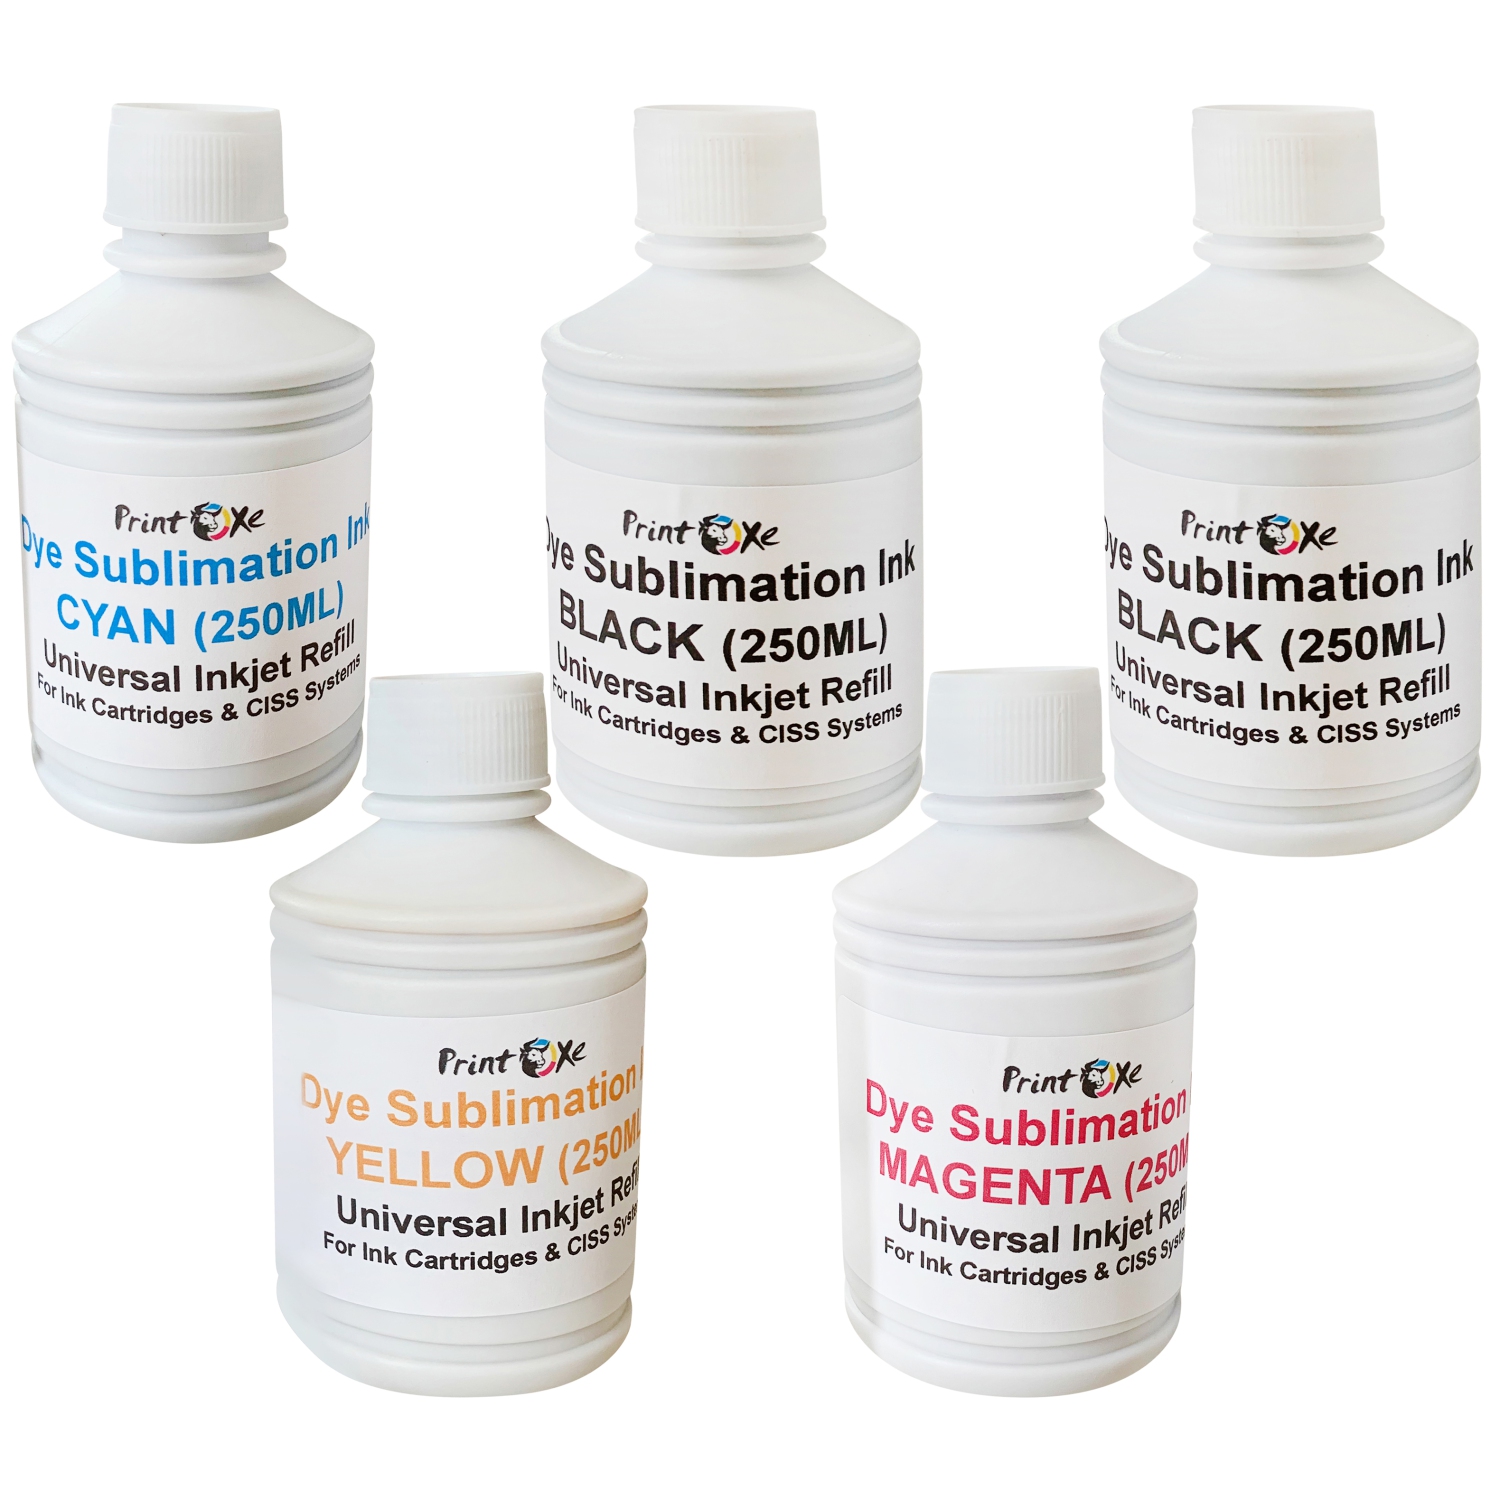 PRINTOXE® Sublimation Ink 5 Refill Bottles (Set+Black) Universal Use Each Bottle 250ML For Printers Clothing and Many Others